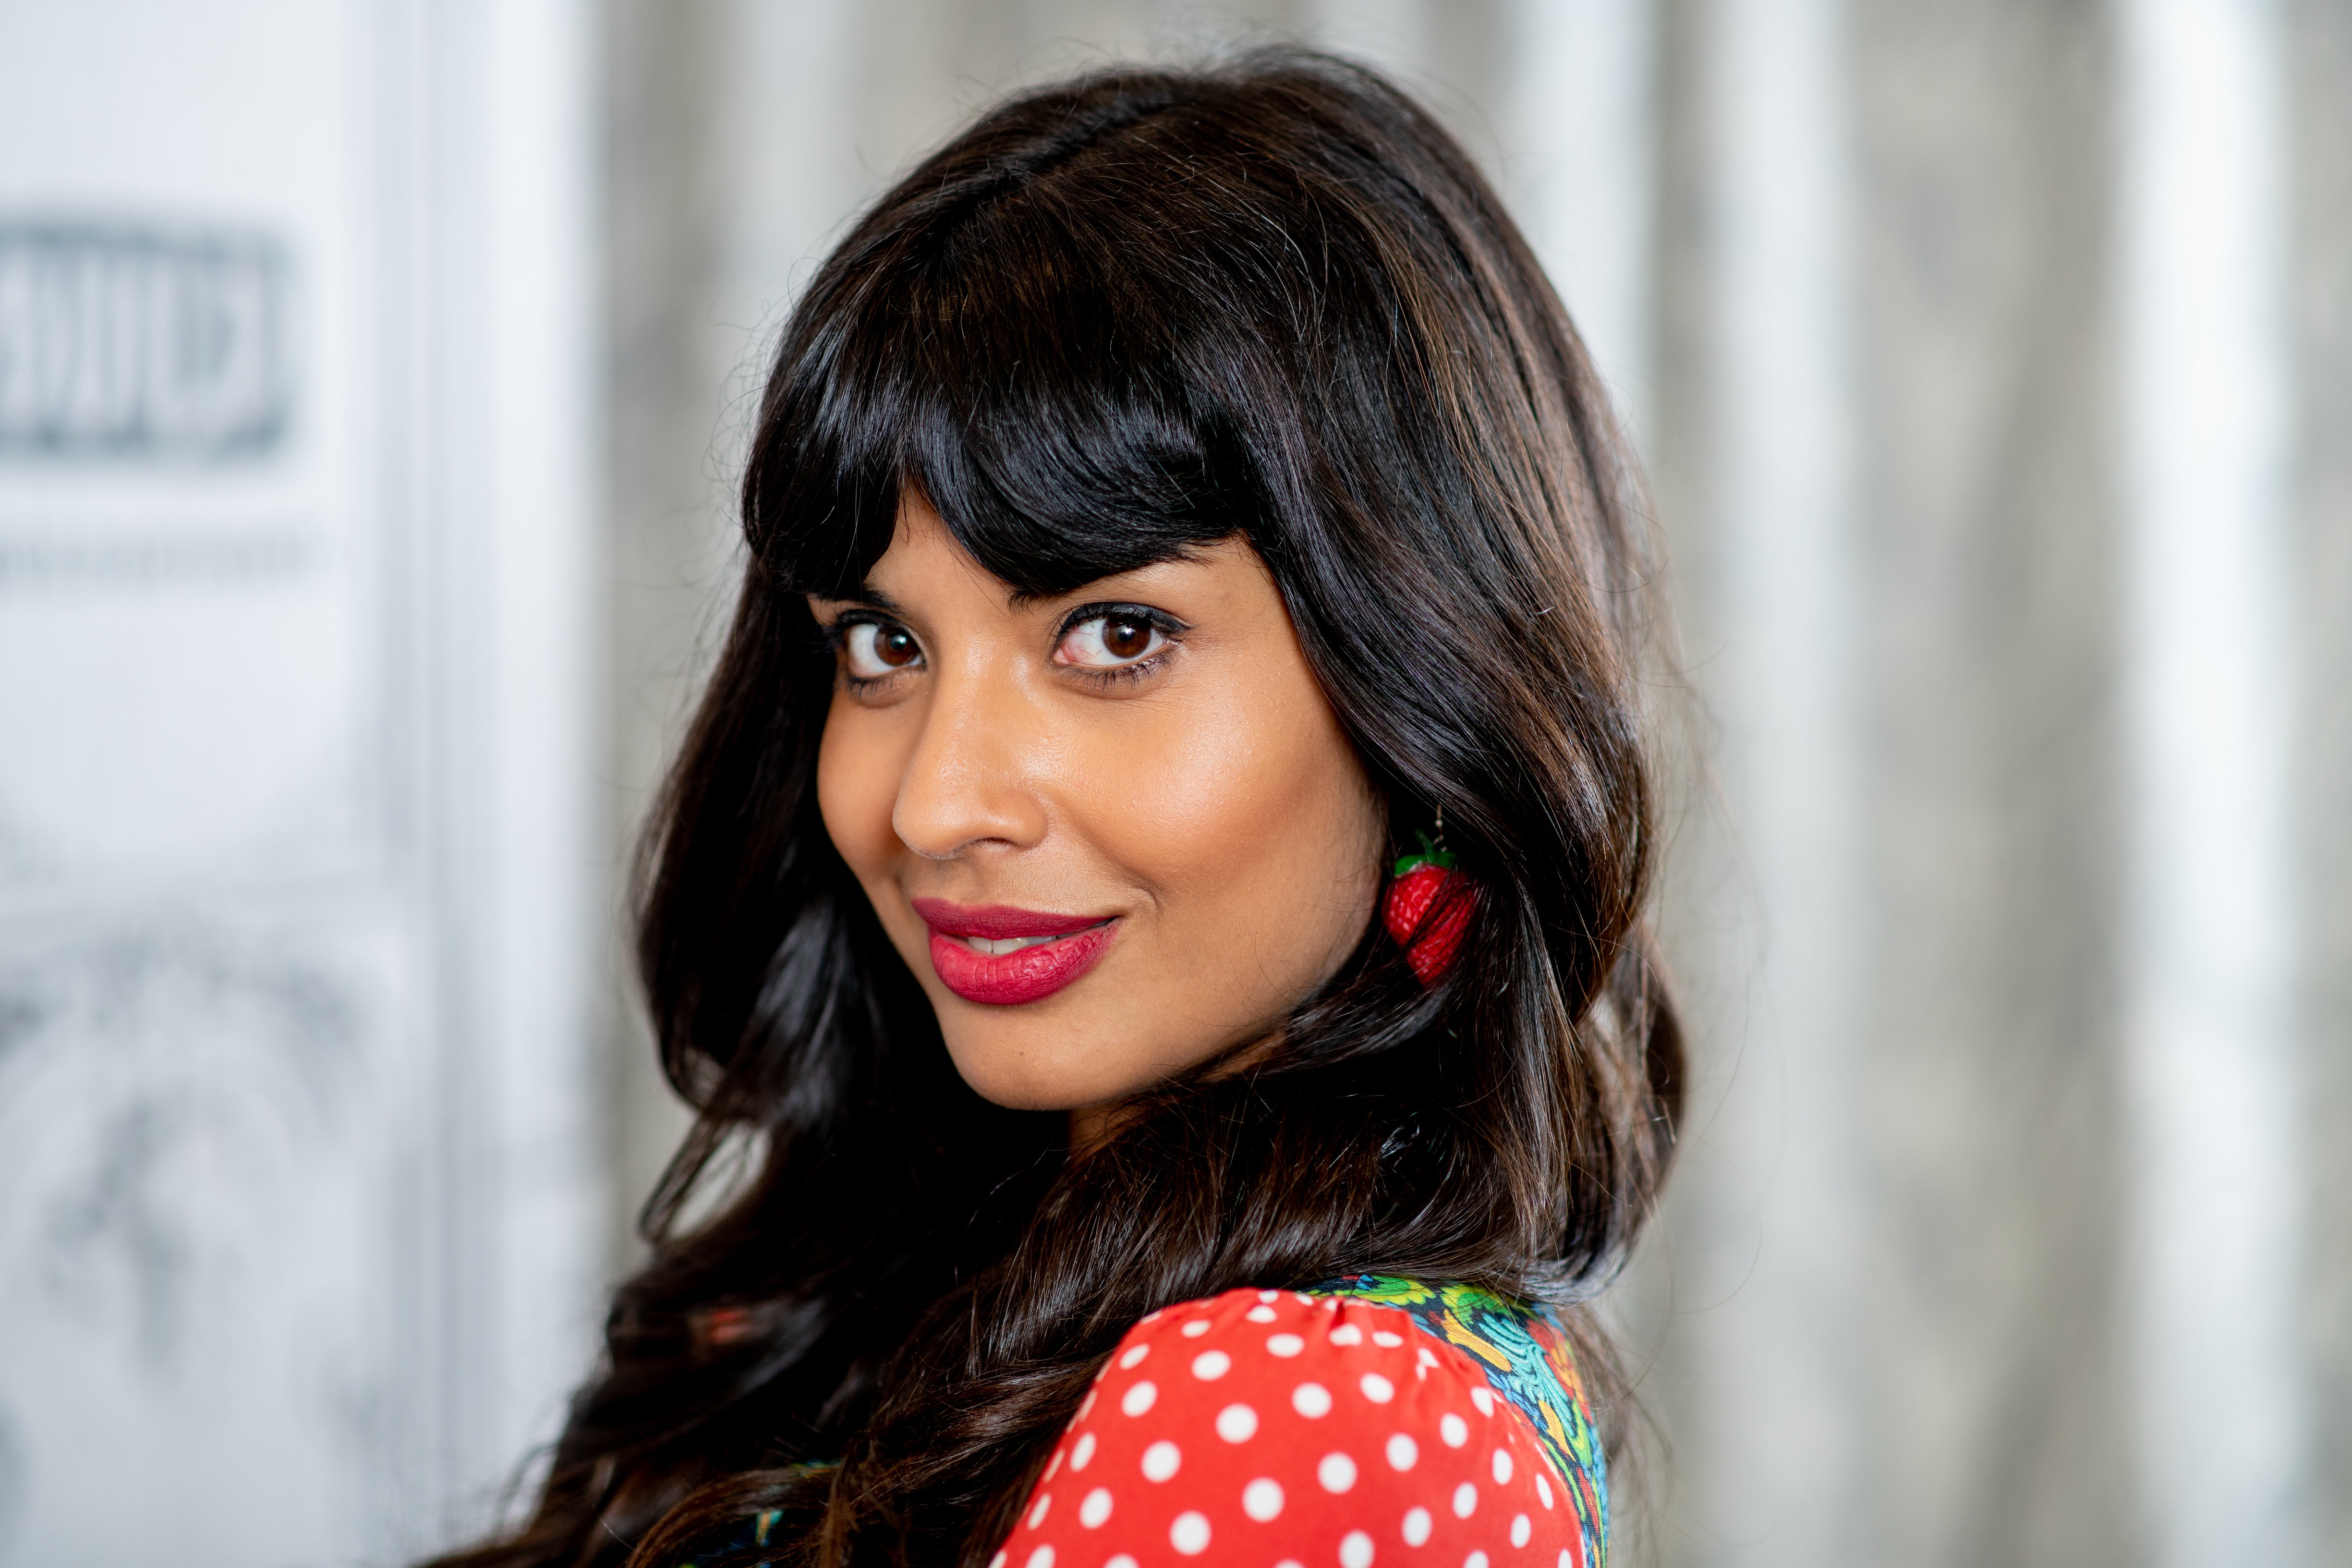 Jameela Jamila, actress on "The Good Place" | Photo: Getty Images